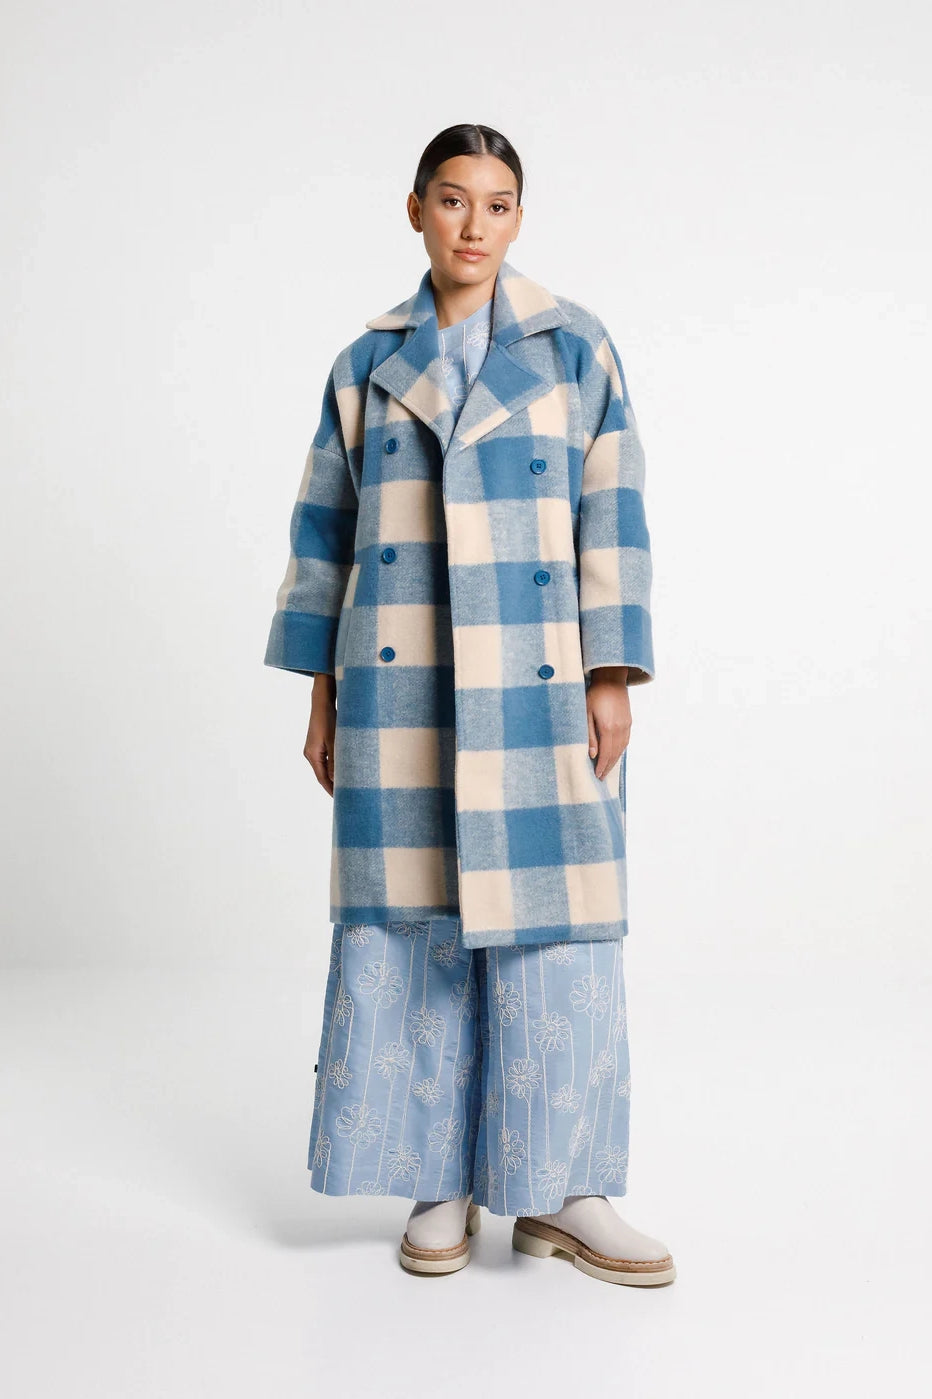  Thing Thing Dixie Coat - Soft Blue Check